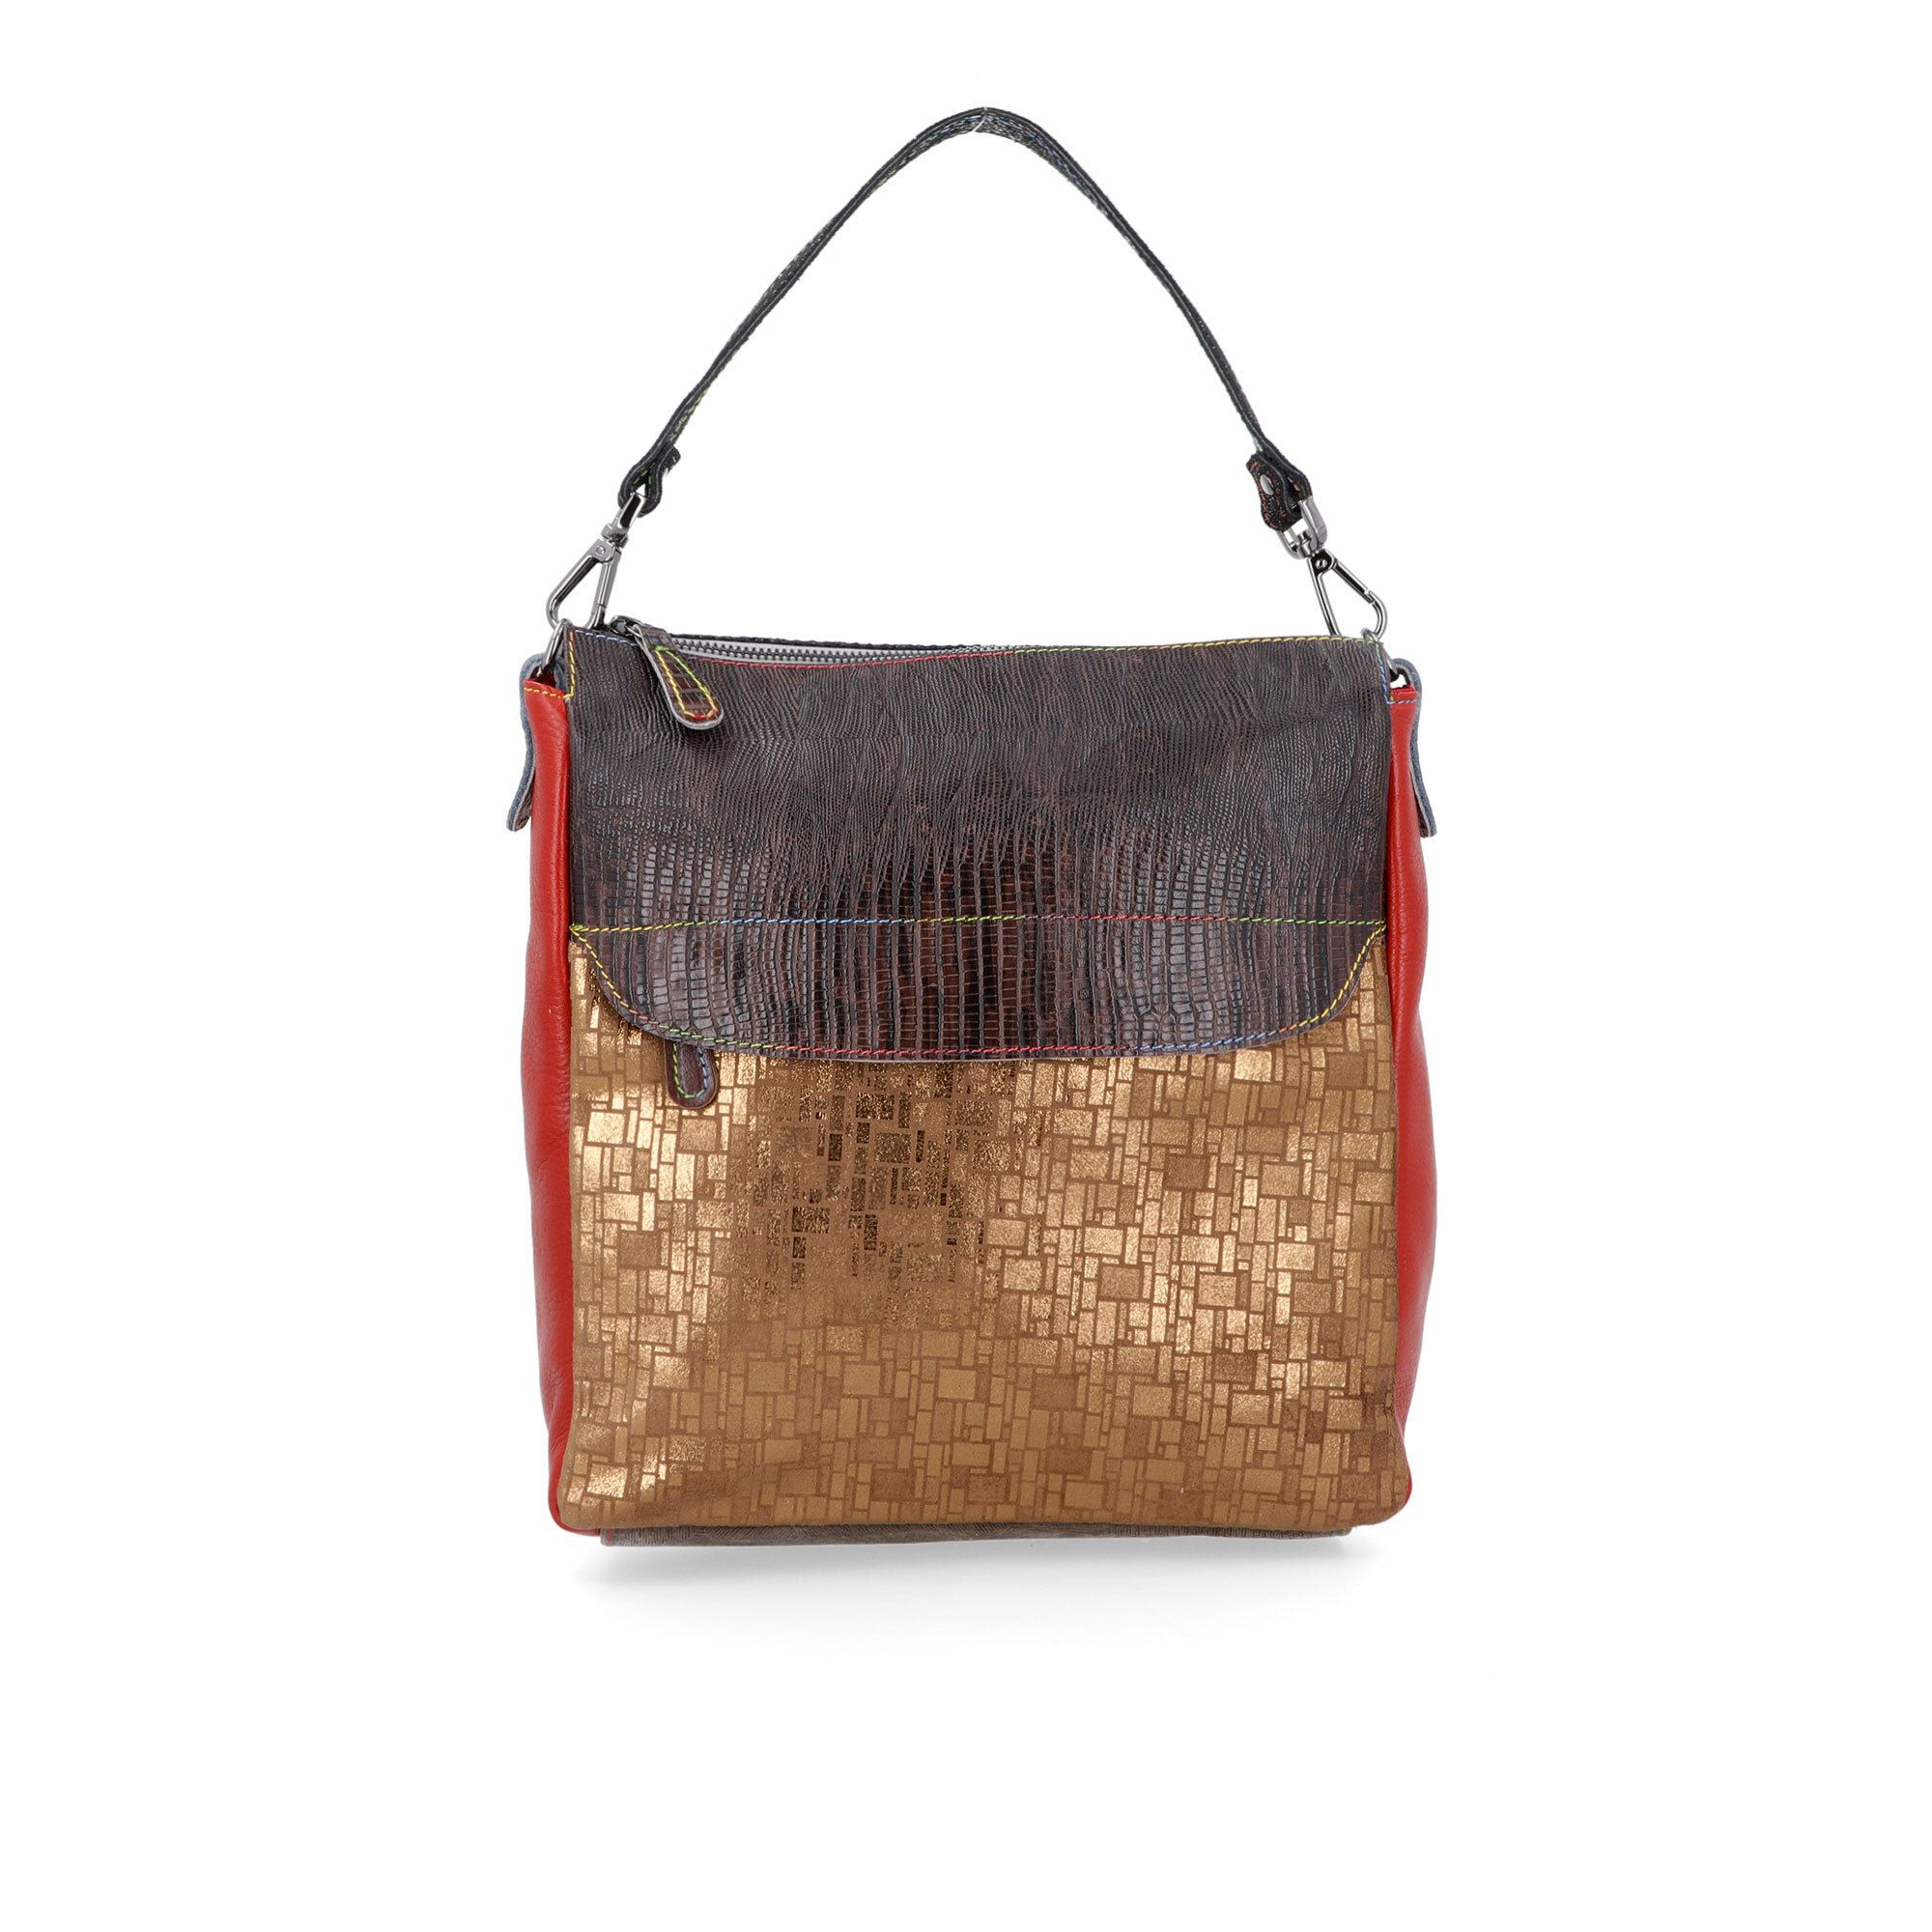 Image of Borsa a spalla in pelle patchwork Country Bag